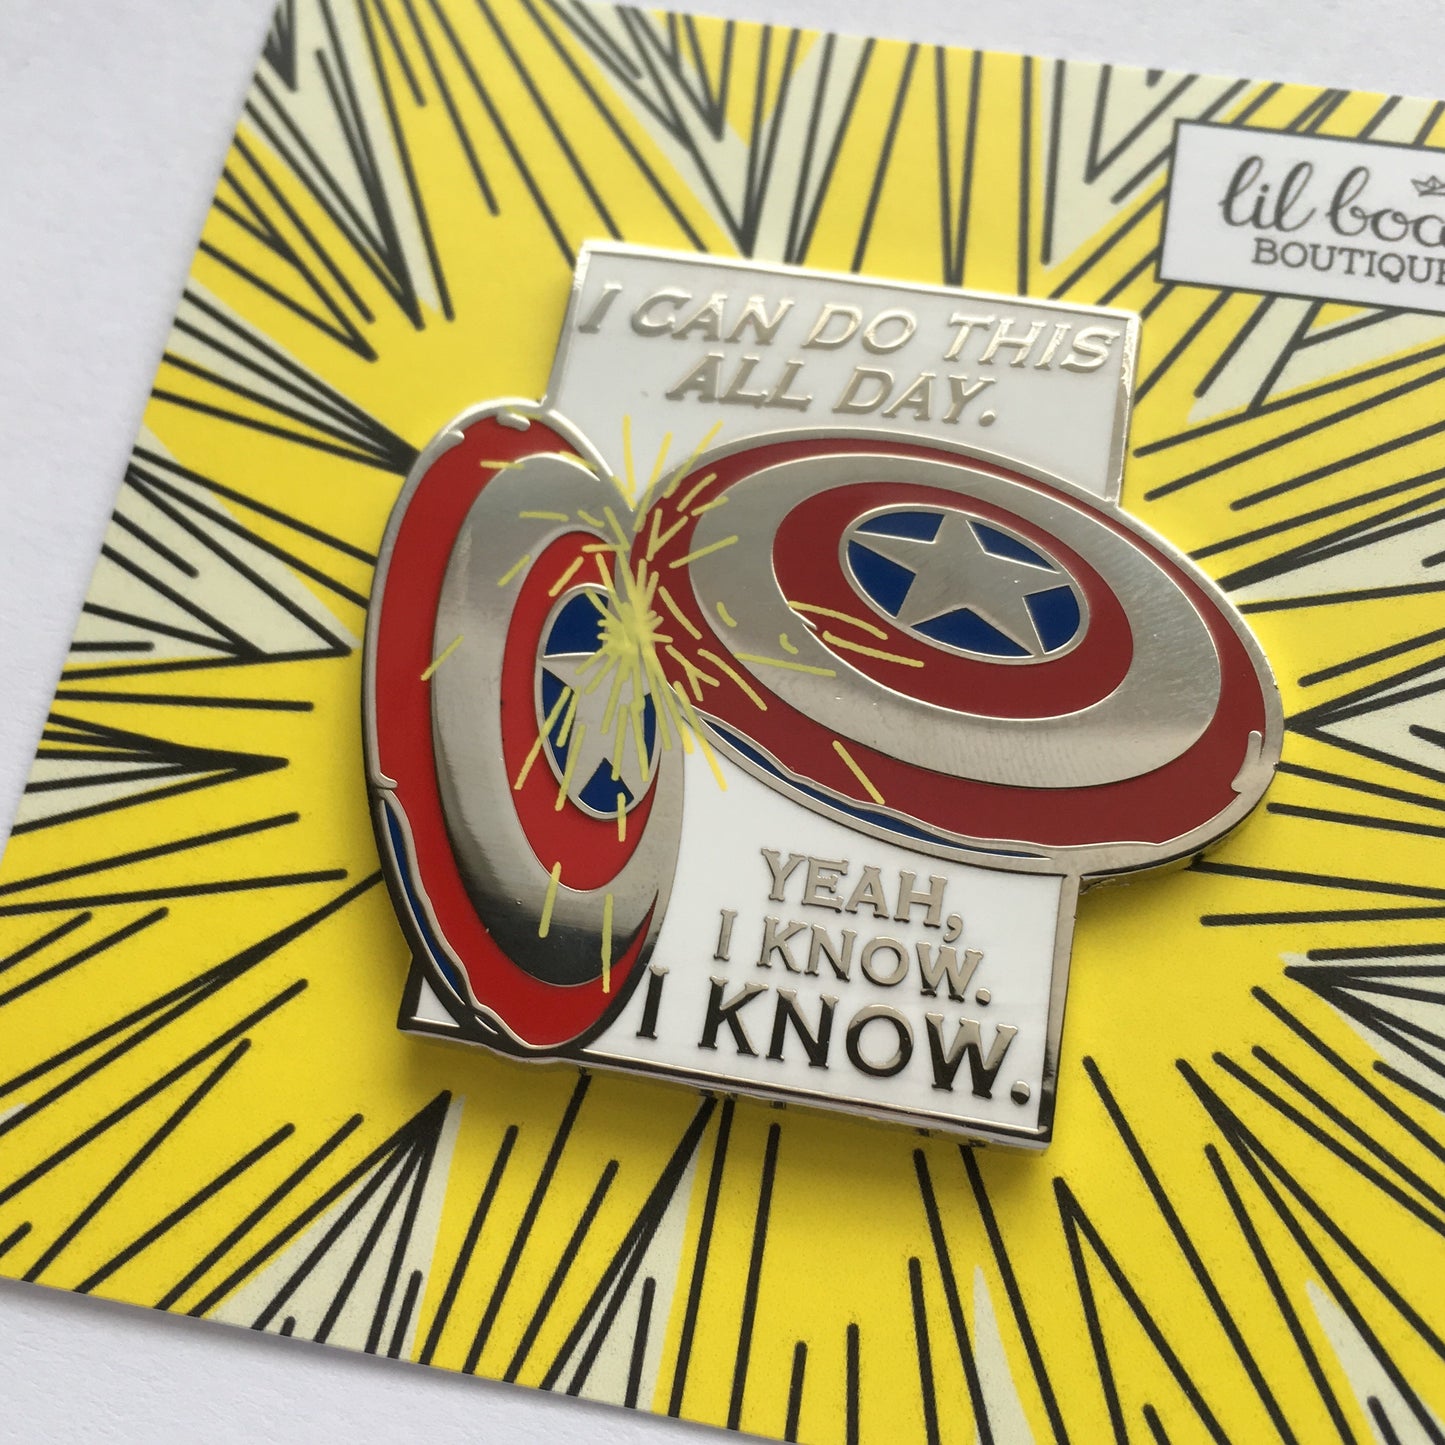 I Can Do This All Day - Enamel Pin - Avengers Endgame Captain America – Lil  Boat Boutique